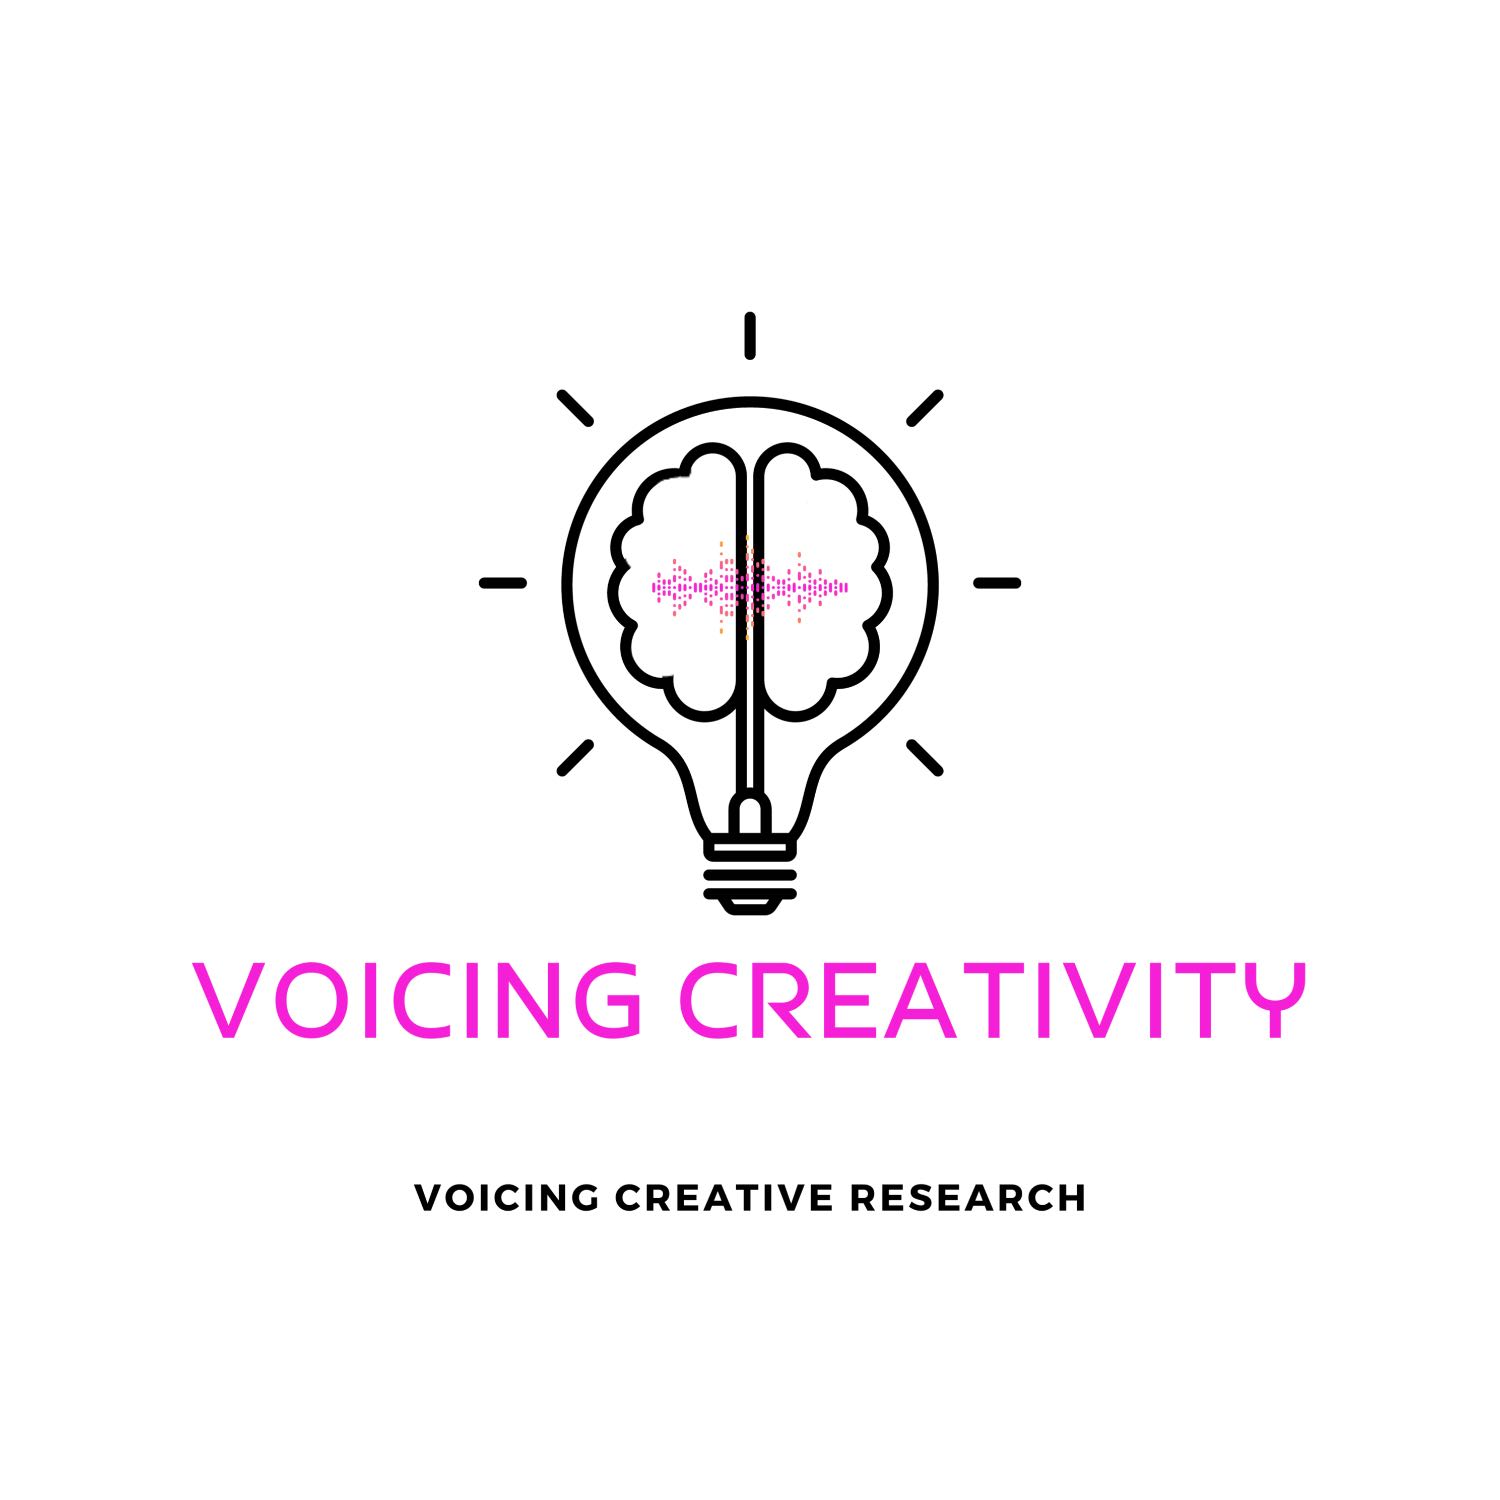 Voicing Creativity - Episode 2 - Dr. Cheryl Thompson (continued)